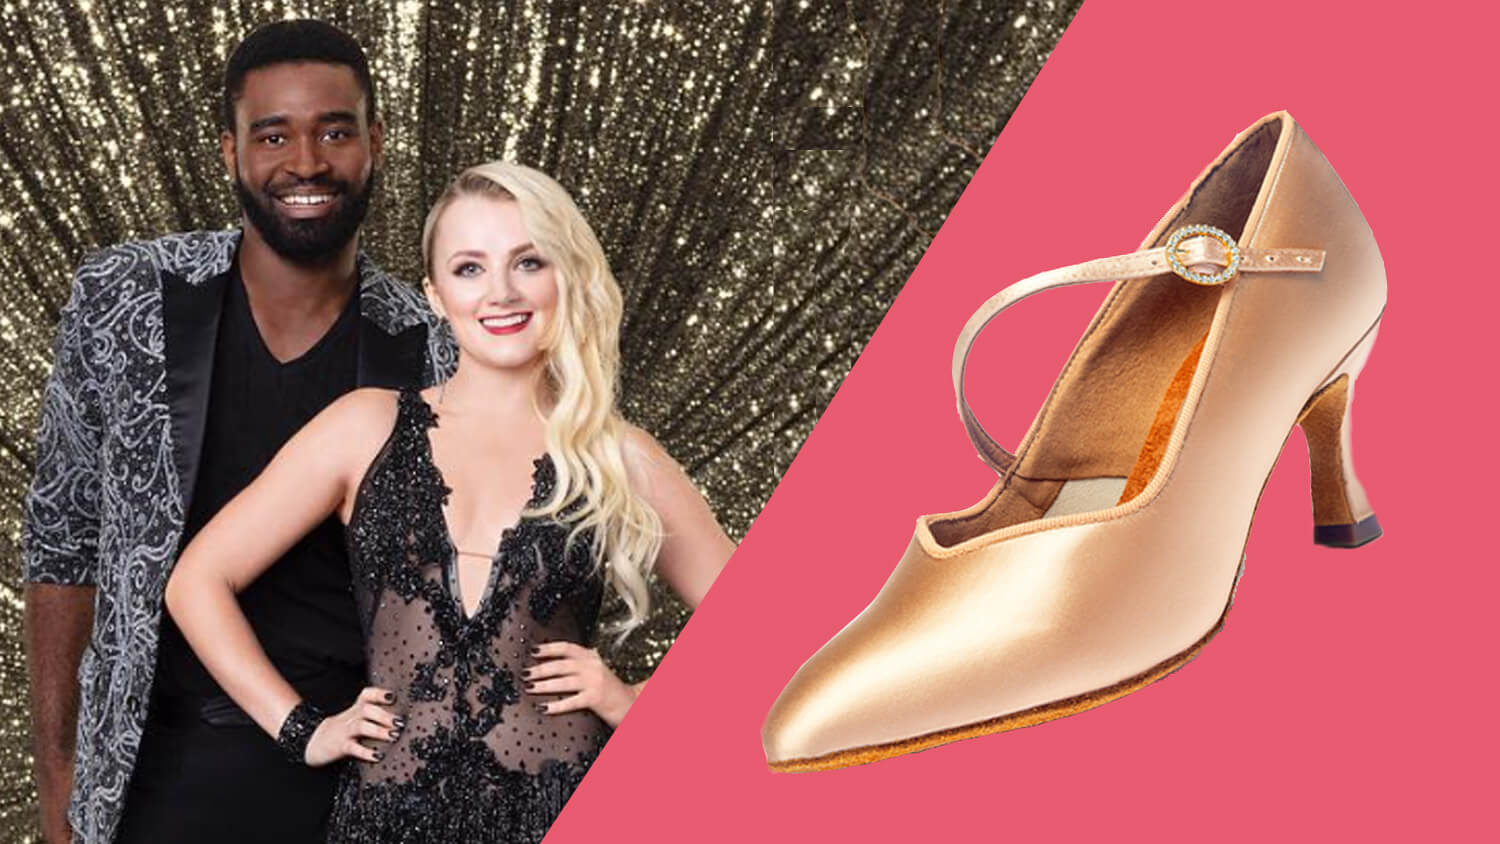 dancing with the stars shoes